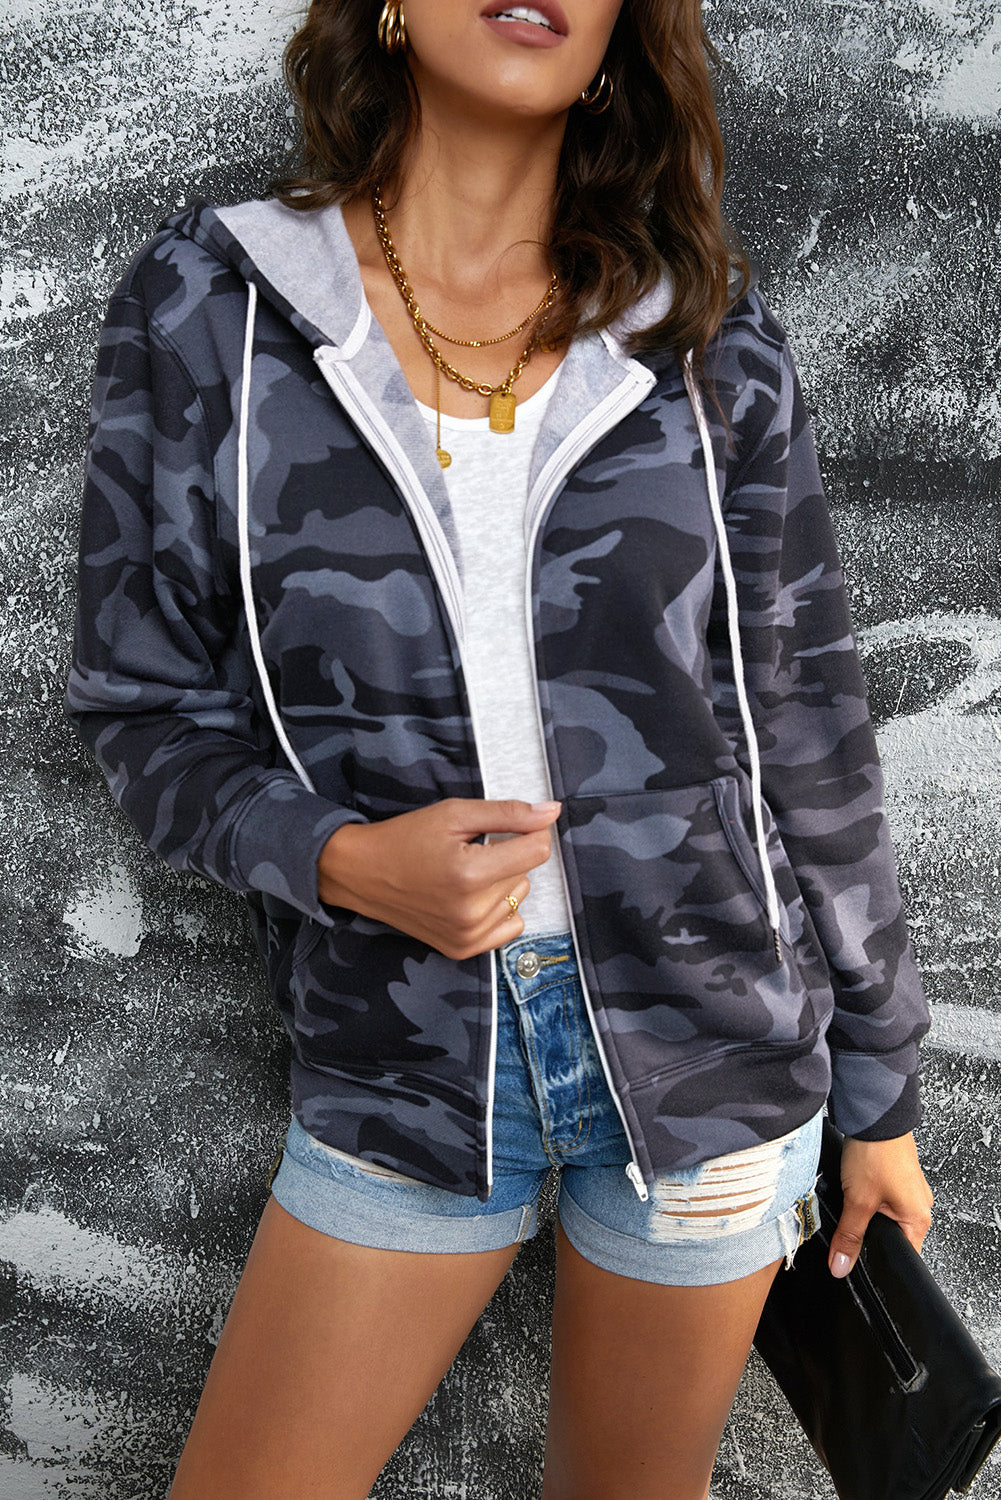 Double Take Camouflage Drawstring Detail Zip Up Hooded Jacket